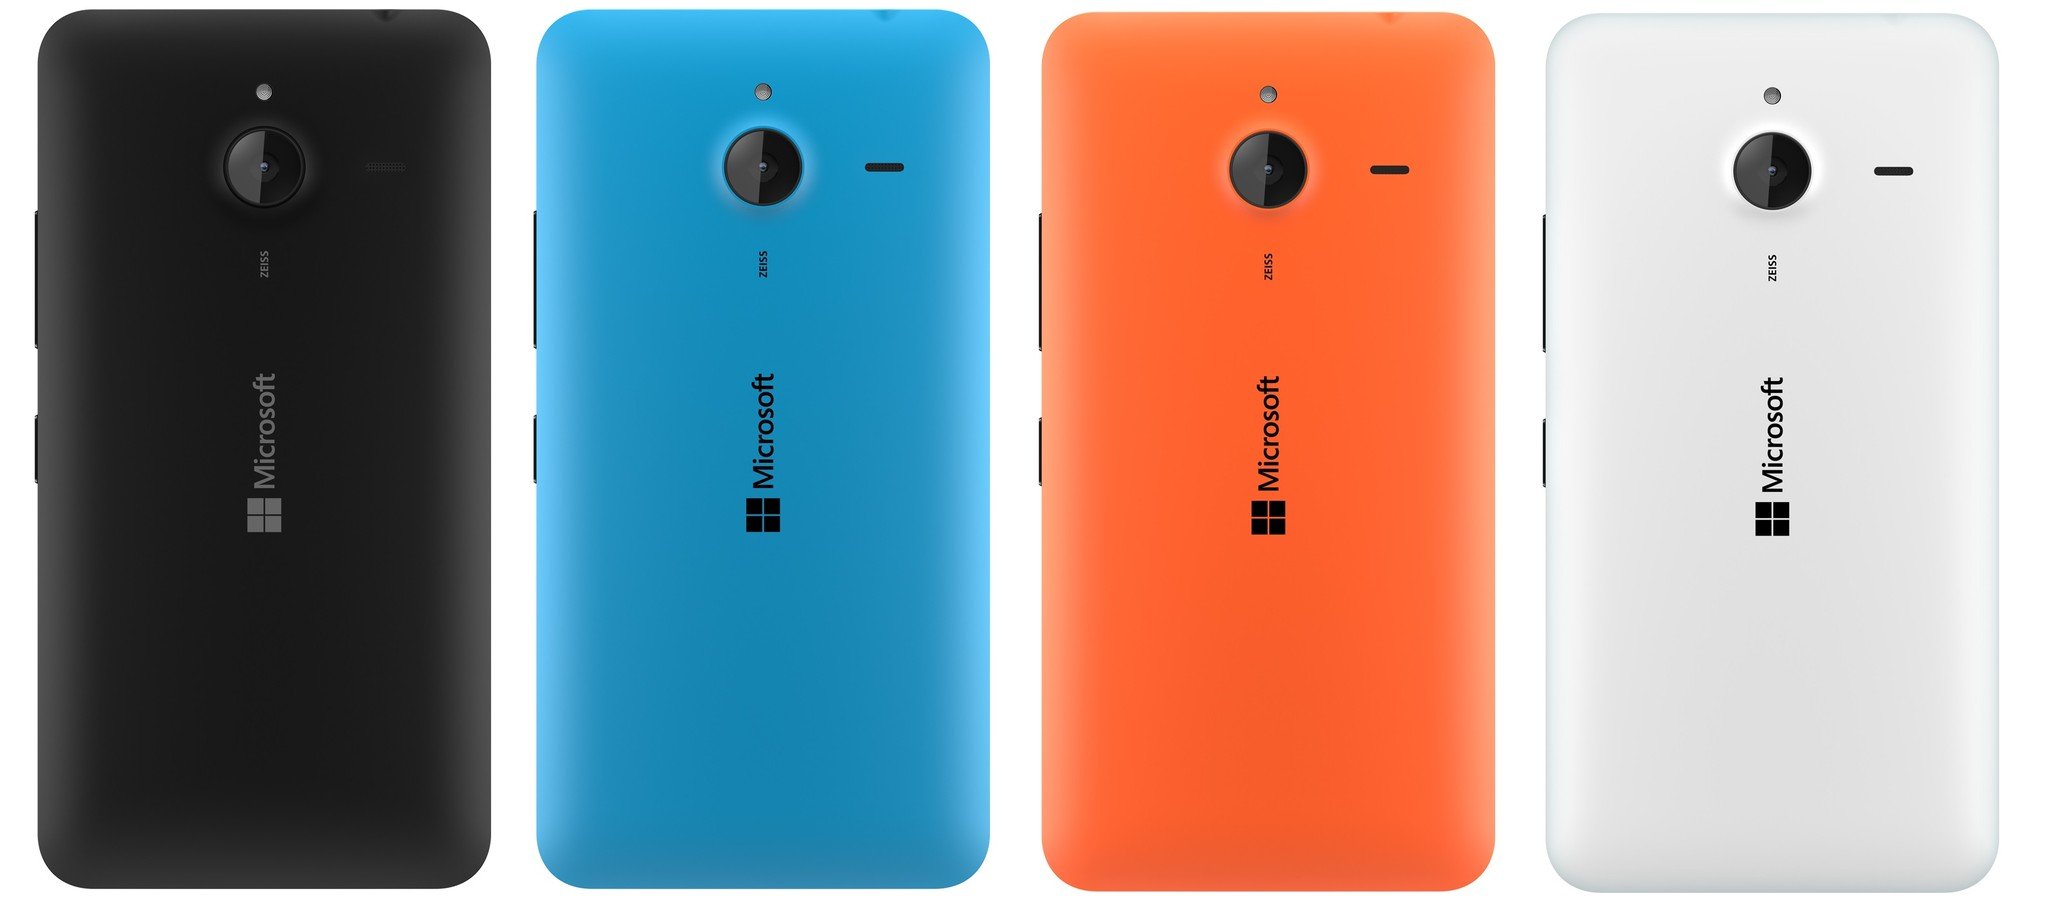 Microsoft Lumia 640 XL covers and colors